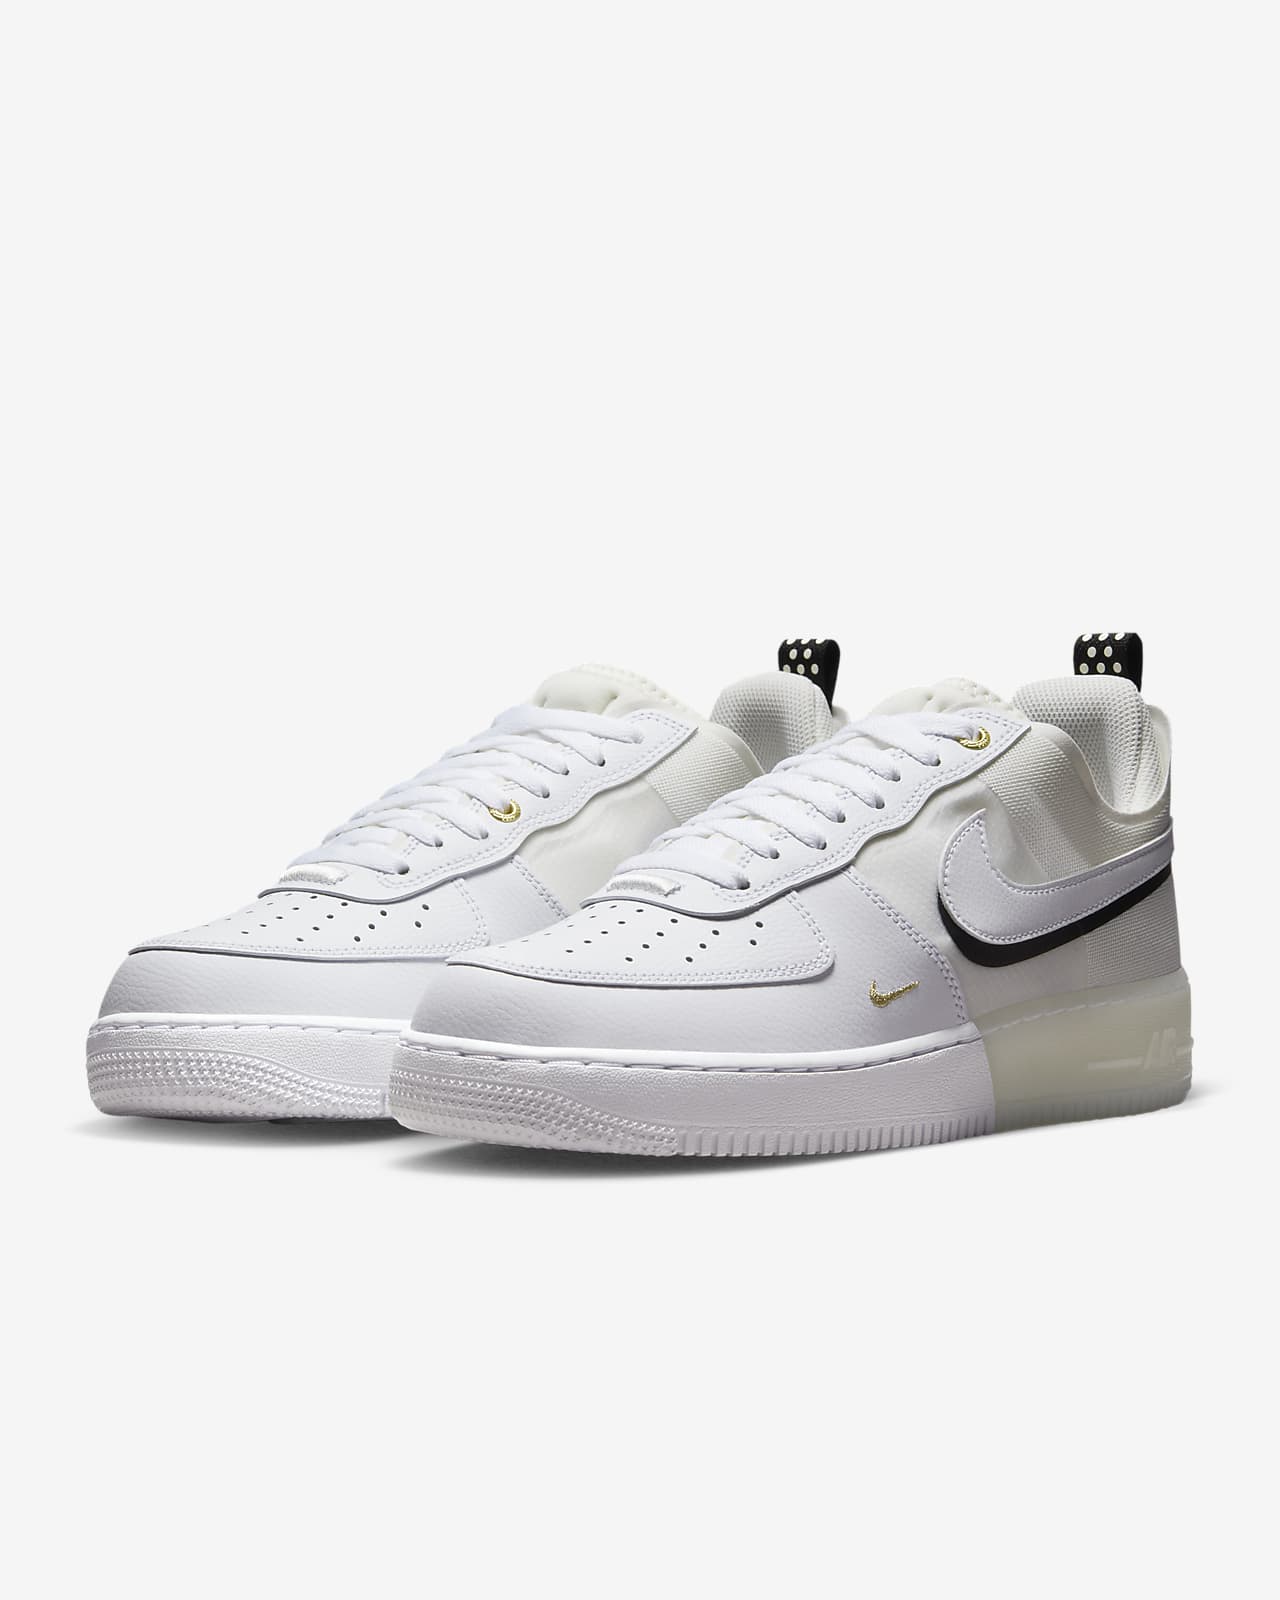 Nike Air Force 1 Low Drops in Monochromatic Black/White